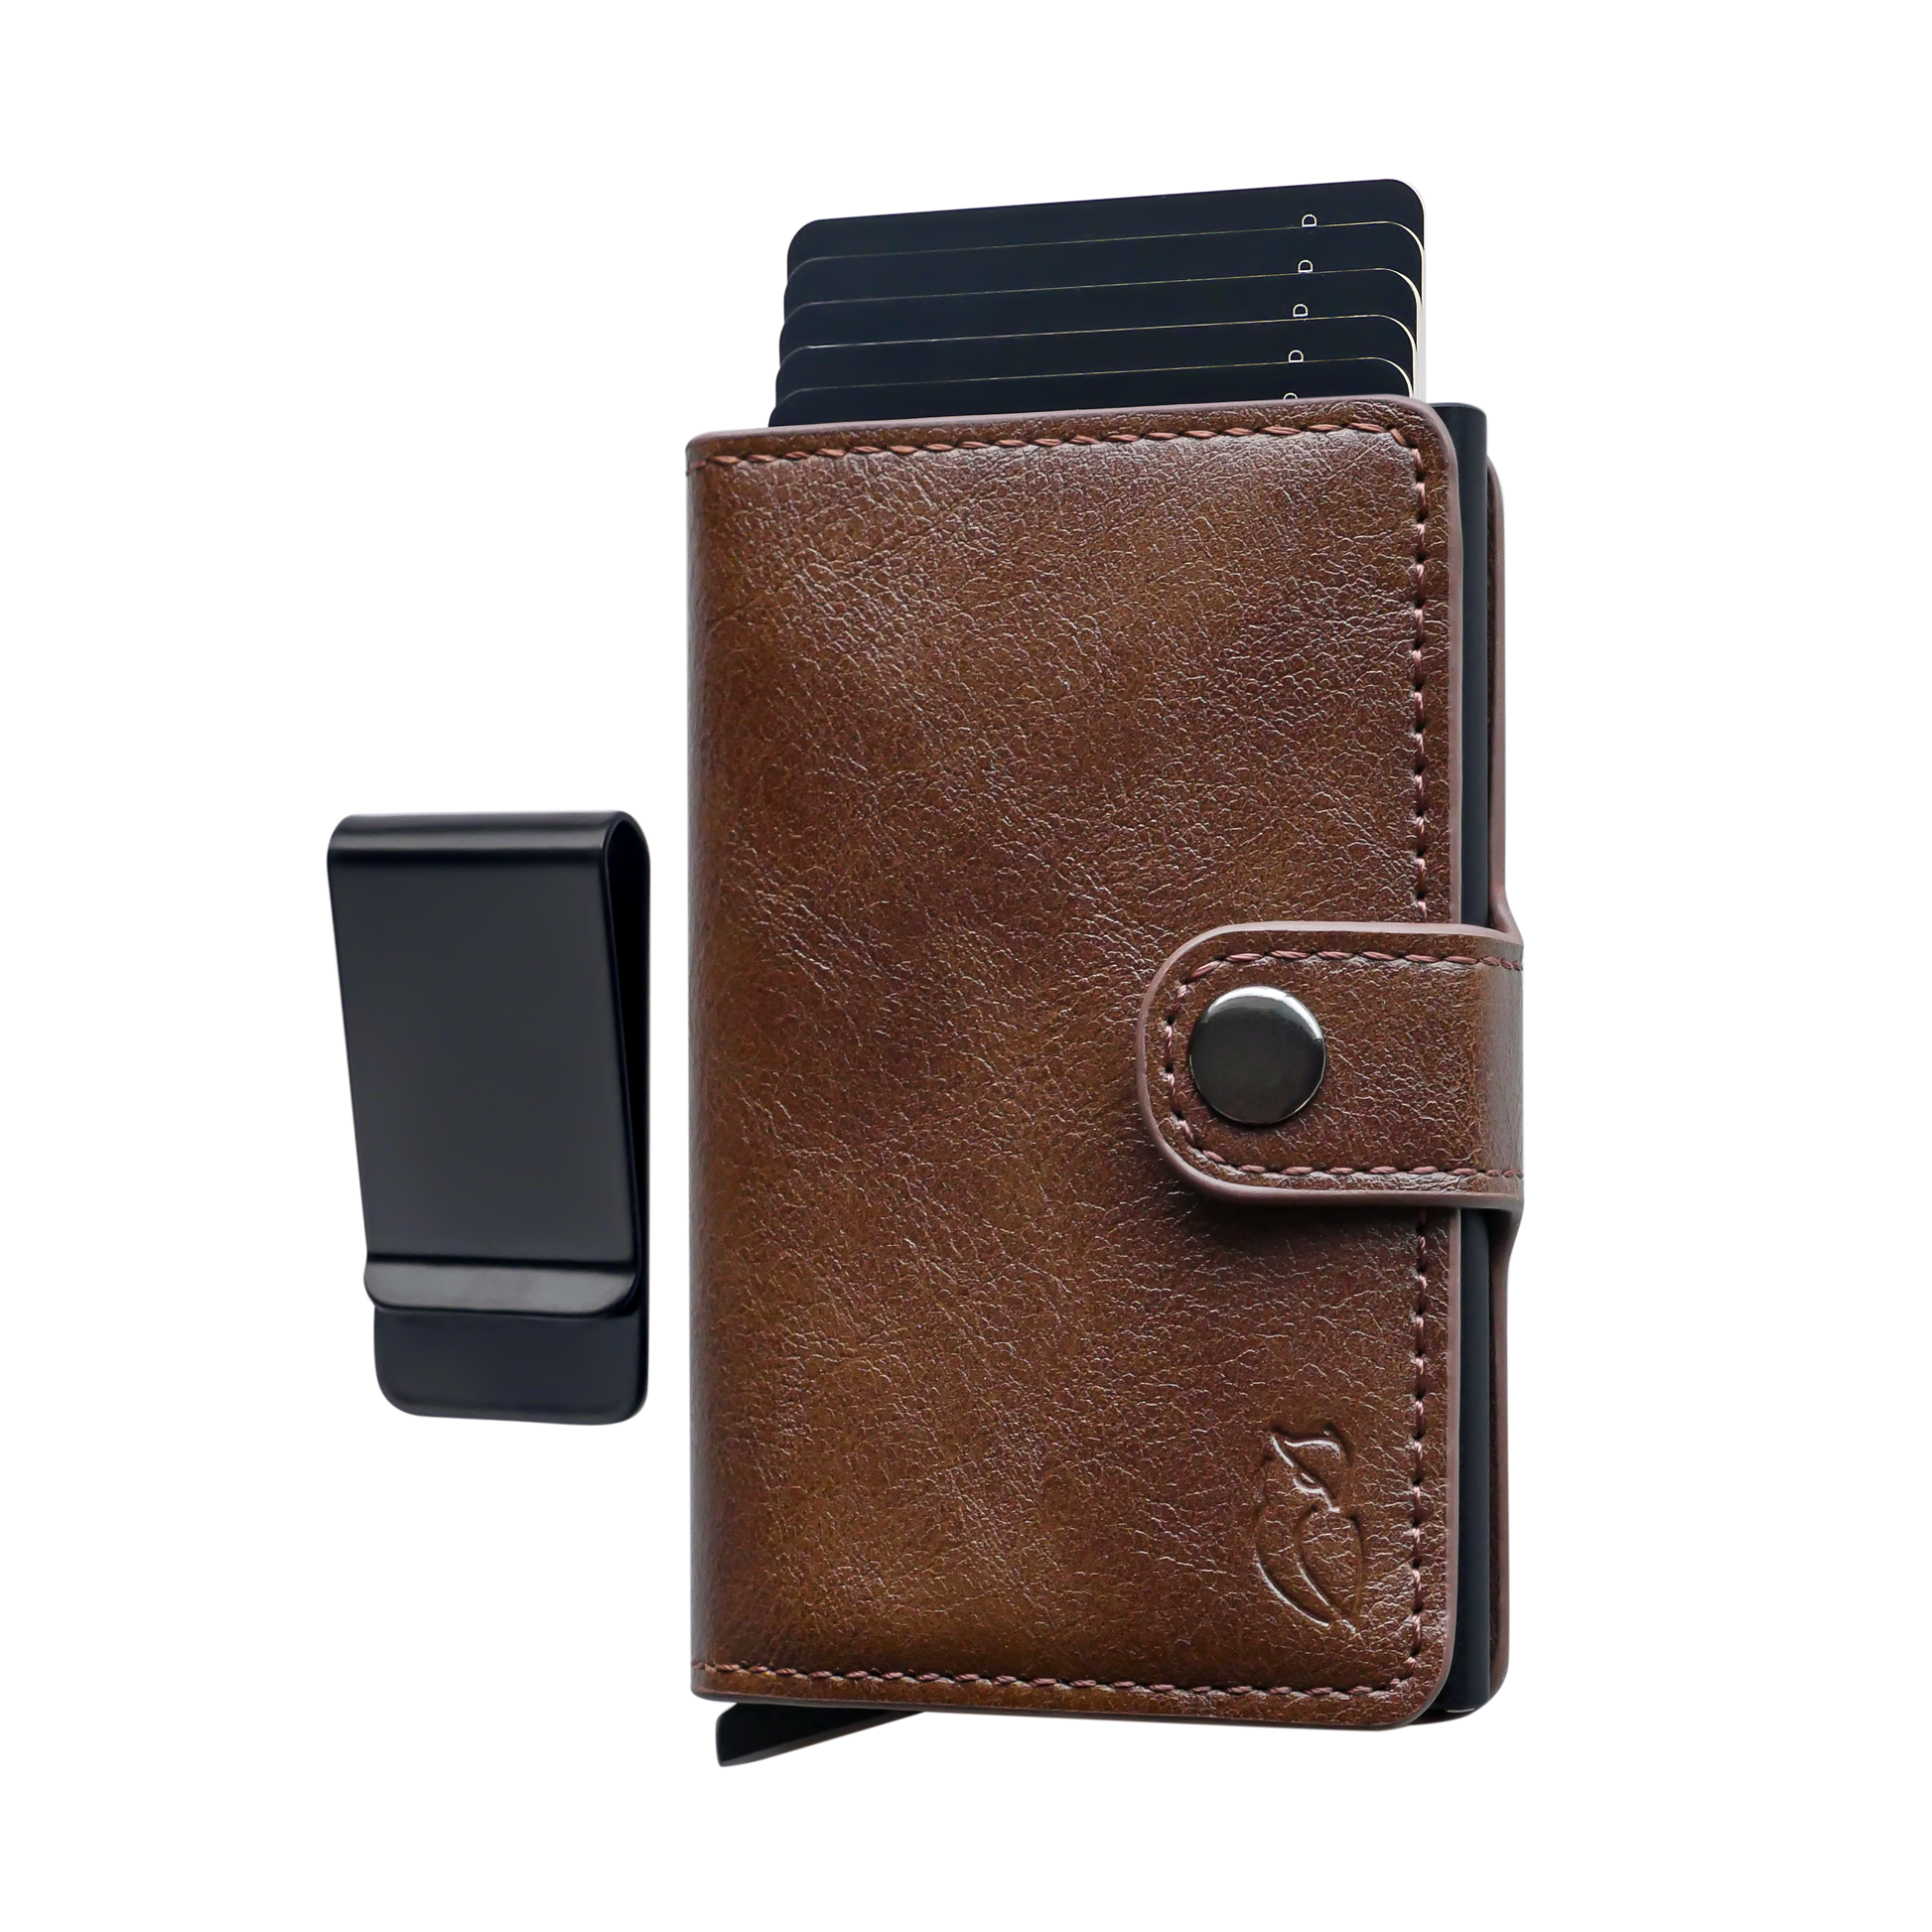  MIRRORLET Wallet with RFID BROWN, (introductory price)  zippered, PU Leather, Bifold Wallet, Credit Card Holders, Photo & ID Holder  and Coin pocket. Also available in wine and black. : Clothing, Shoes